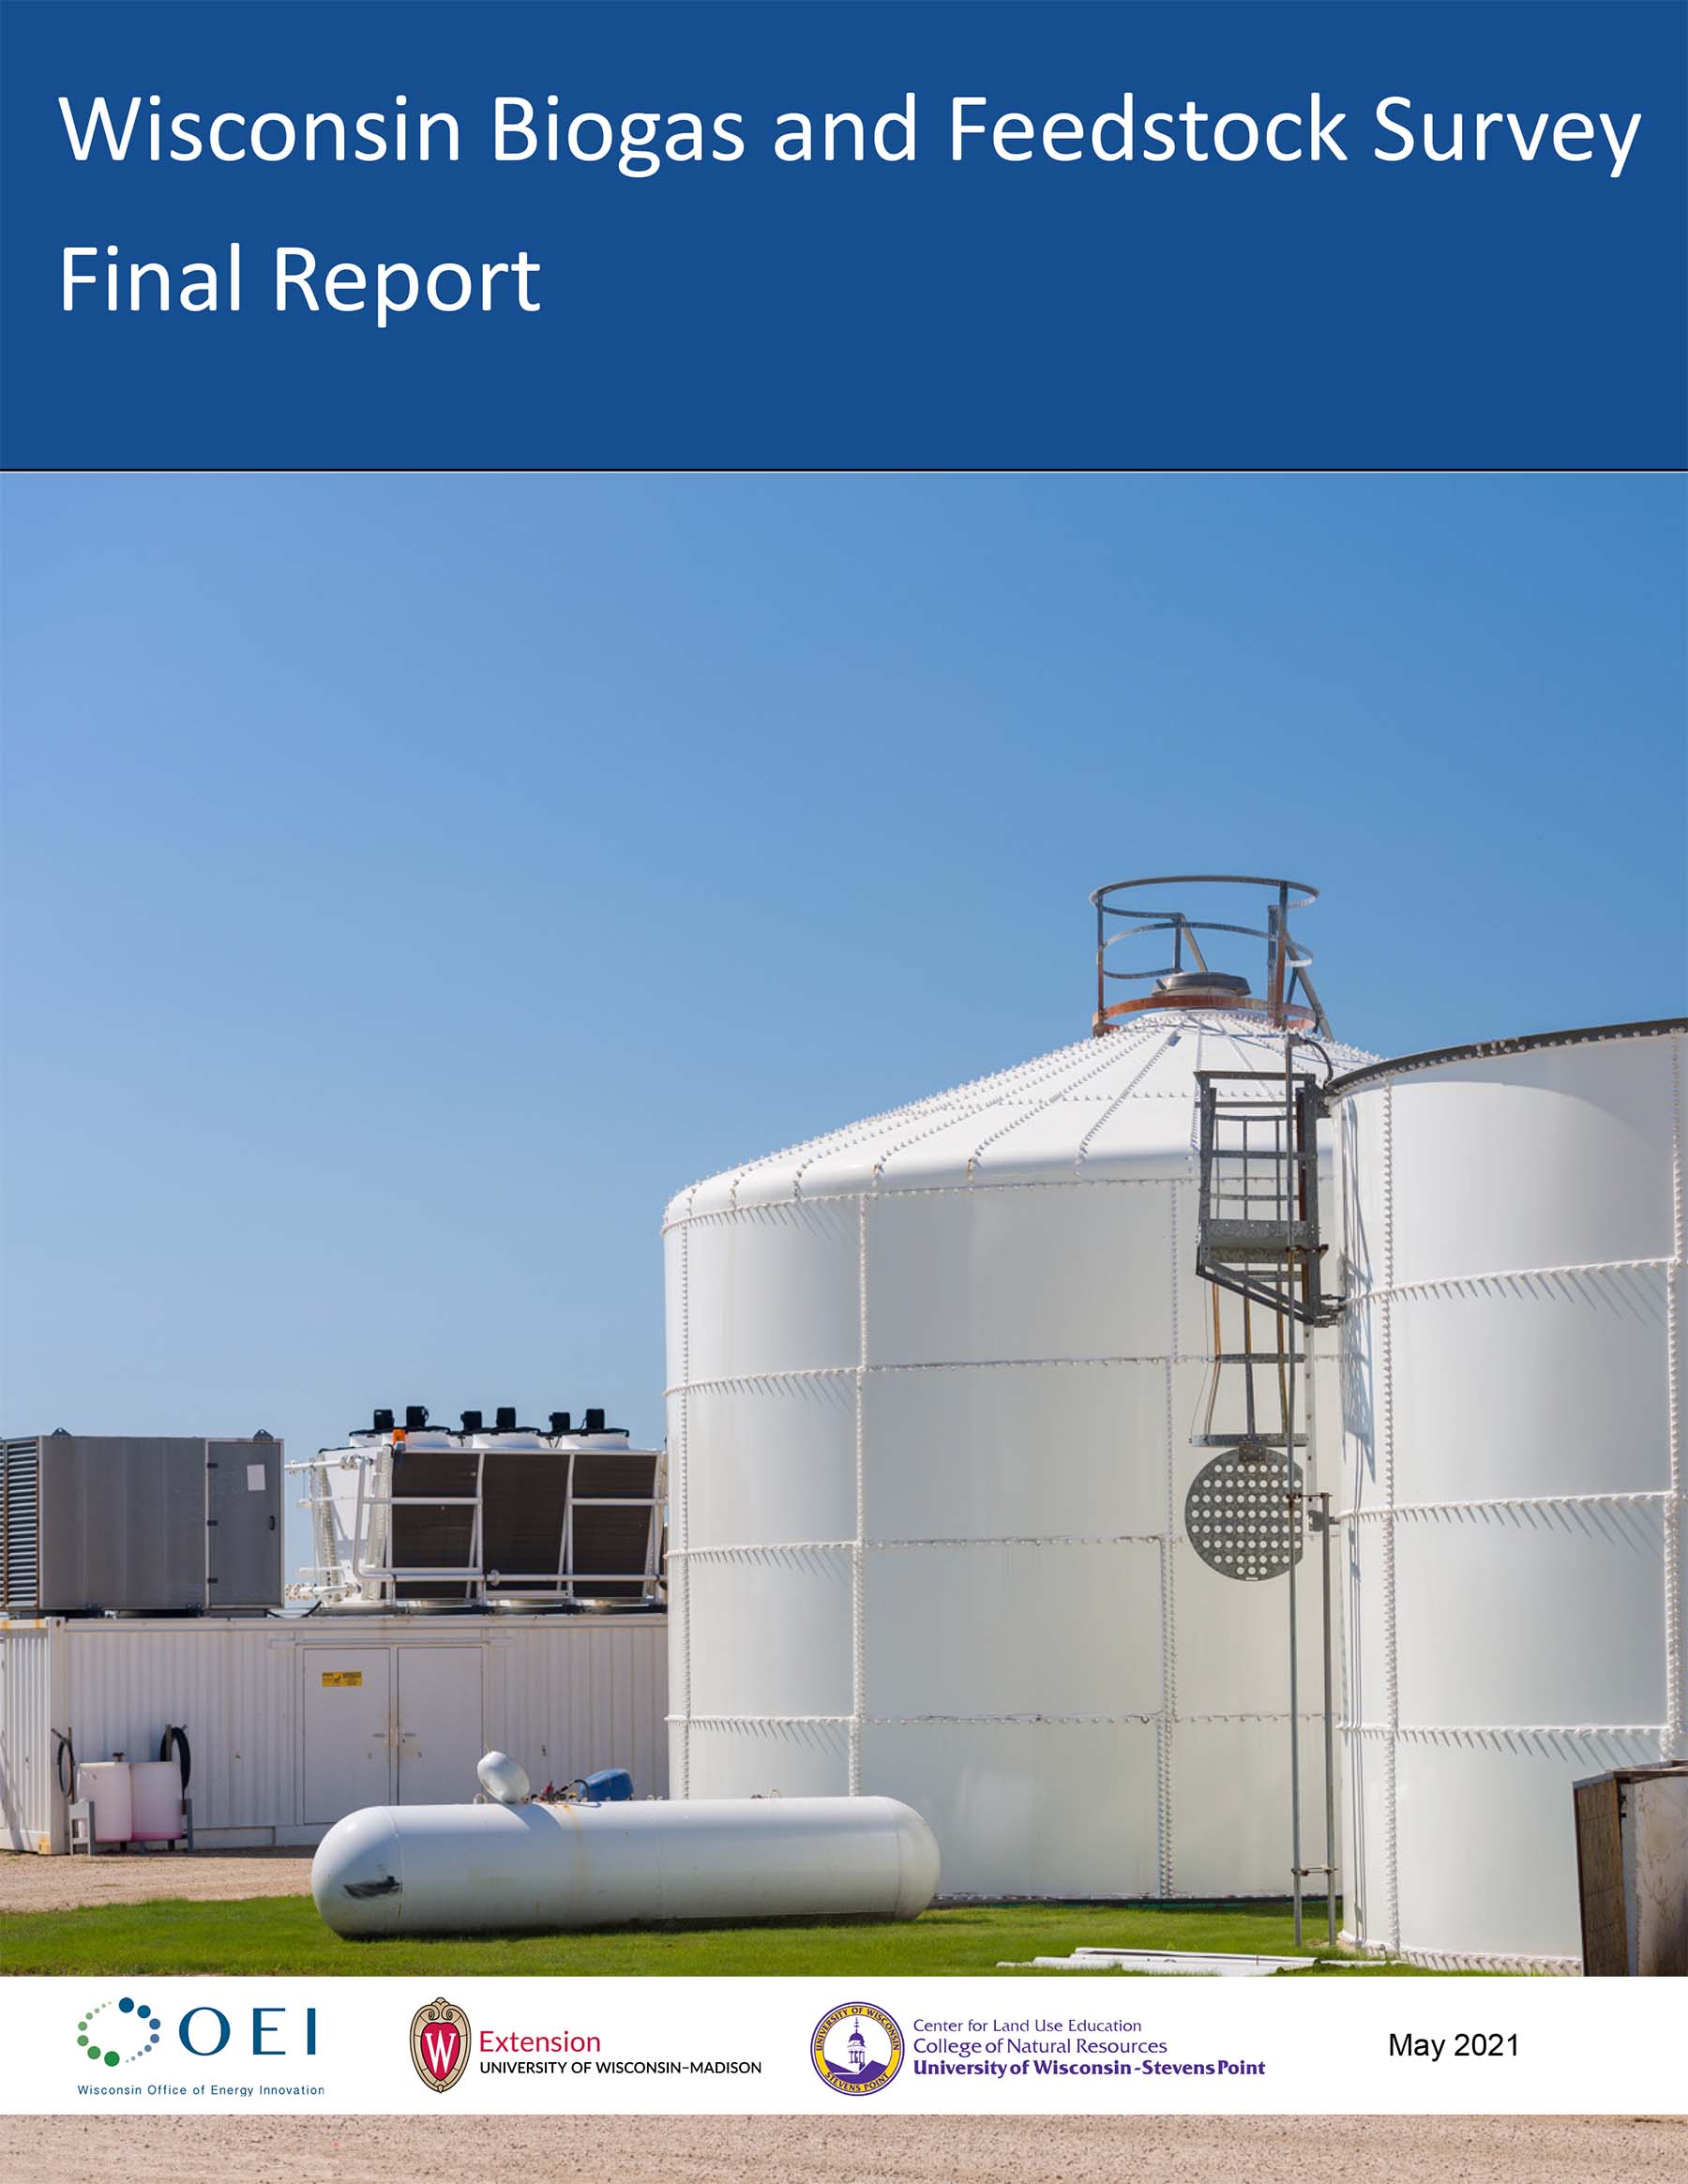 Image of Wi Biogas Survey 2021 report cover